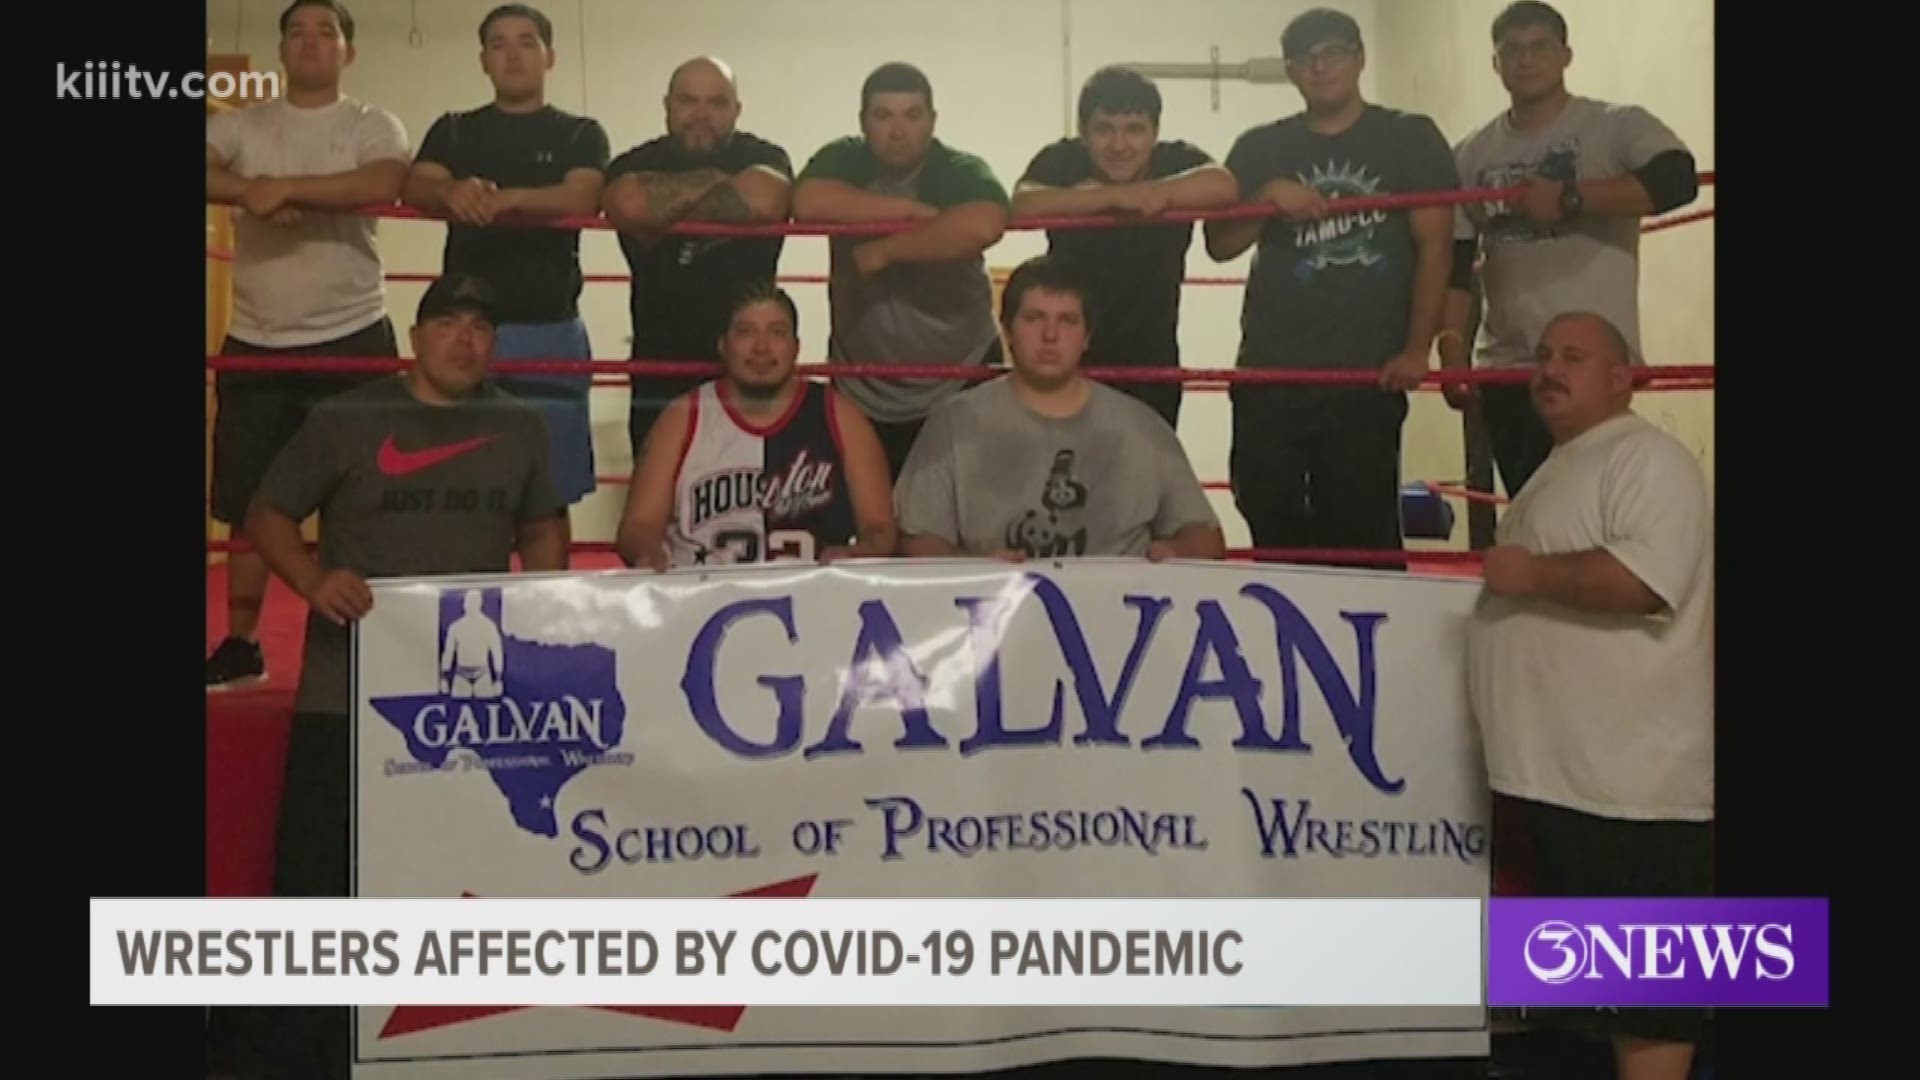 Despite the hard times and challenges the pandemic has thrown their way, they're ready to come back stronger than ever.